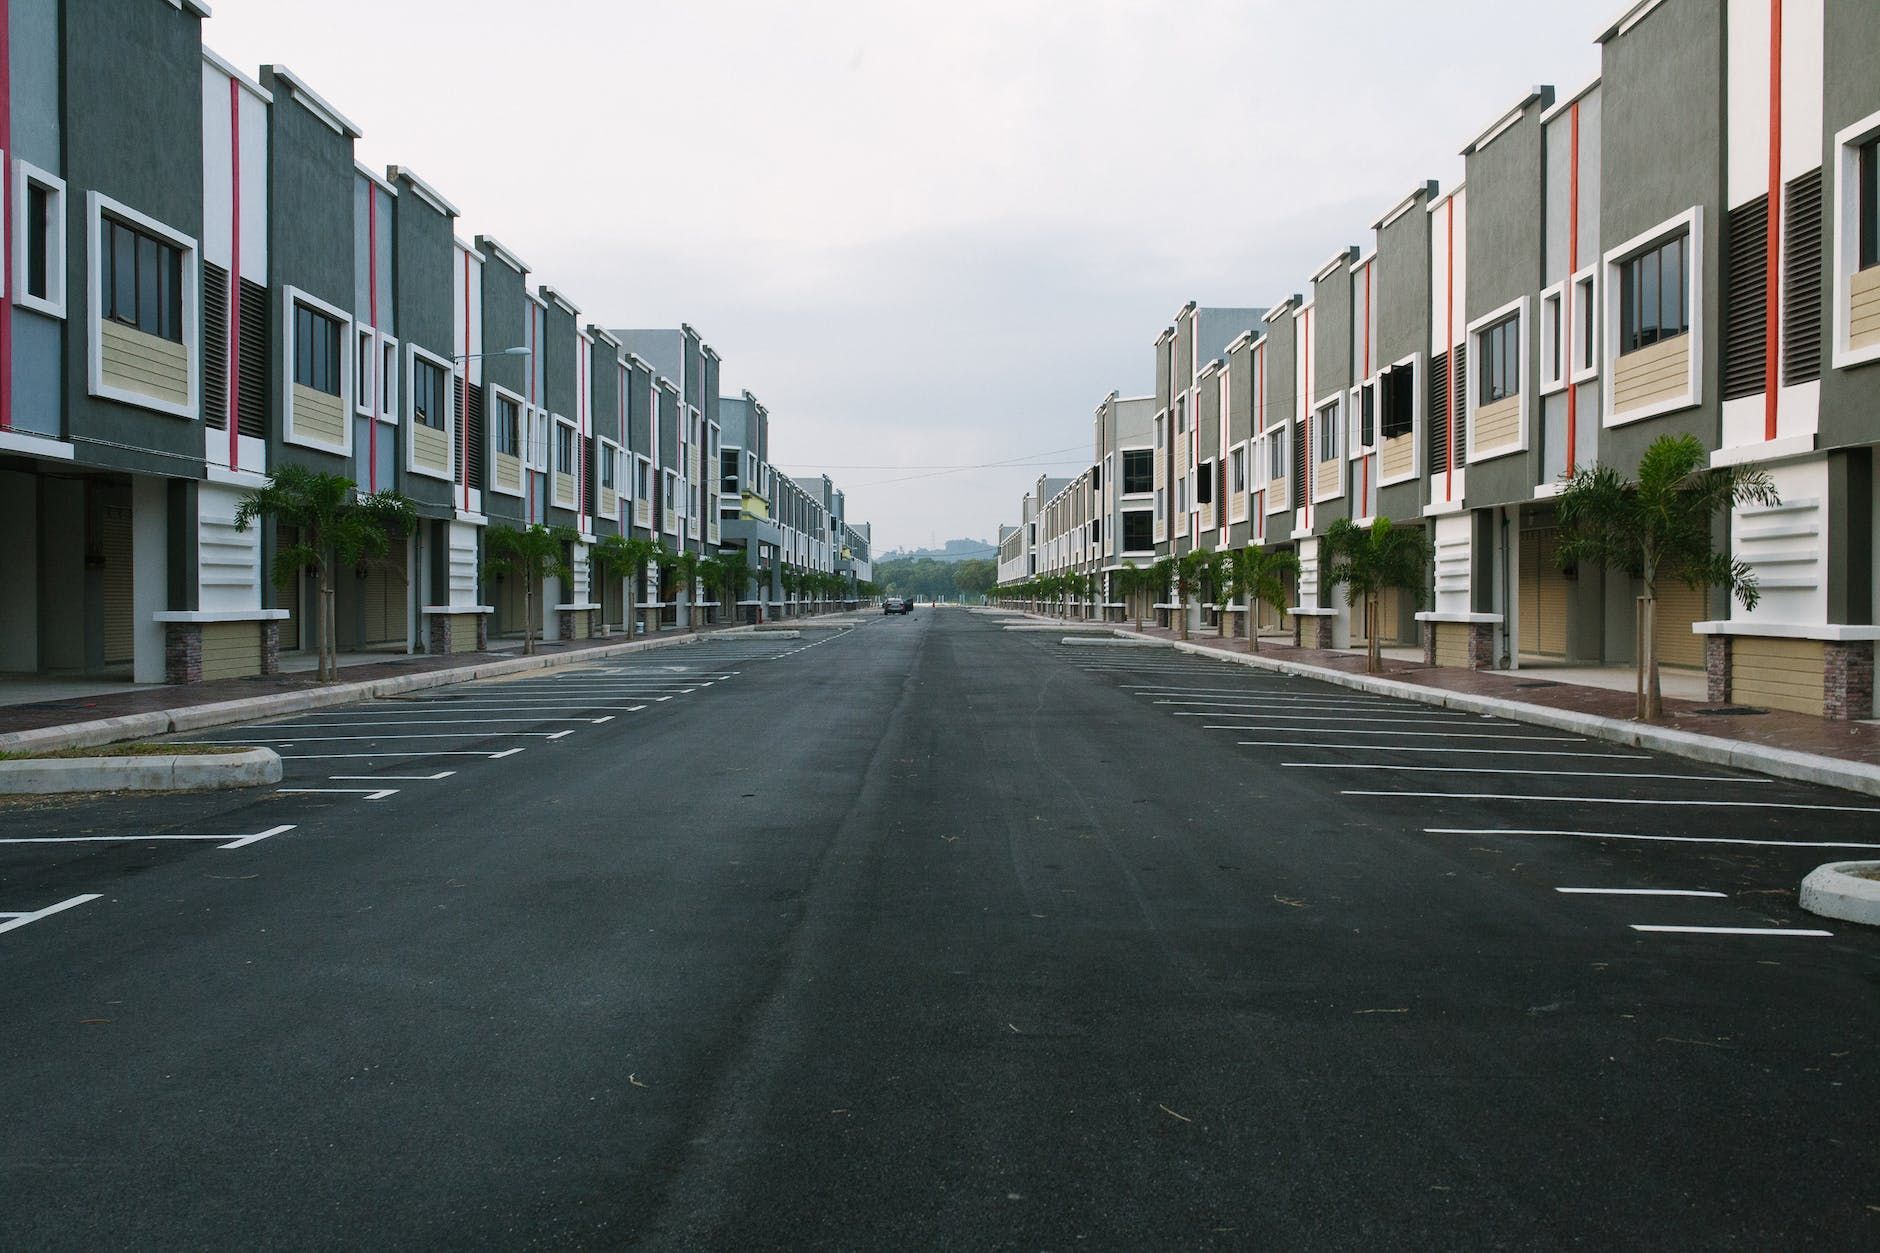 An empty street with a row of buildings on both sides